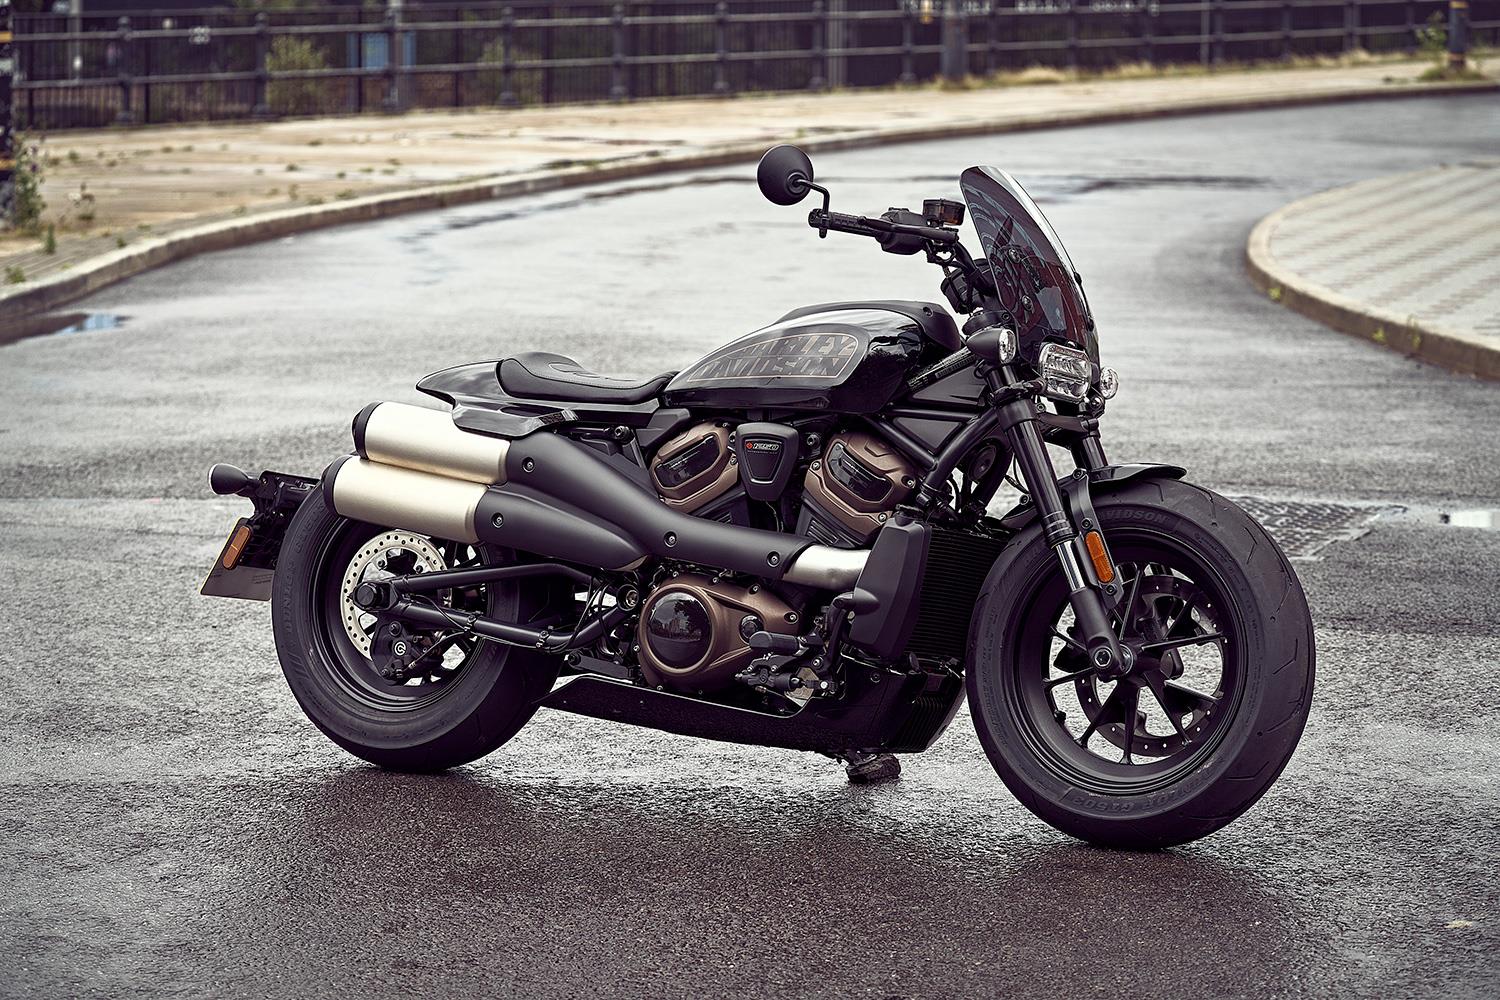 2021 Harley-Davidson Sportster S review | all-new H-D